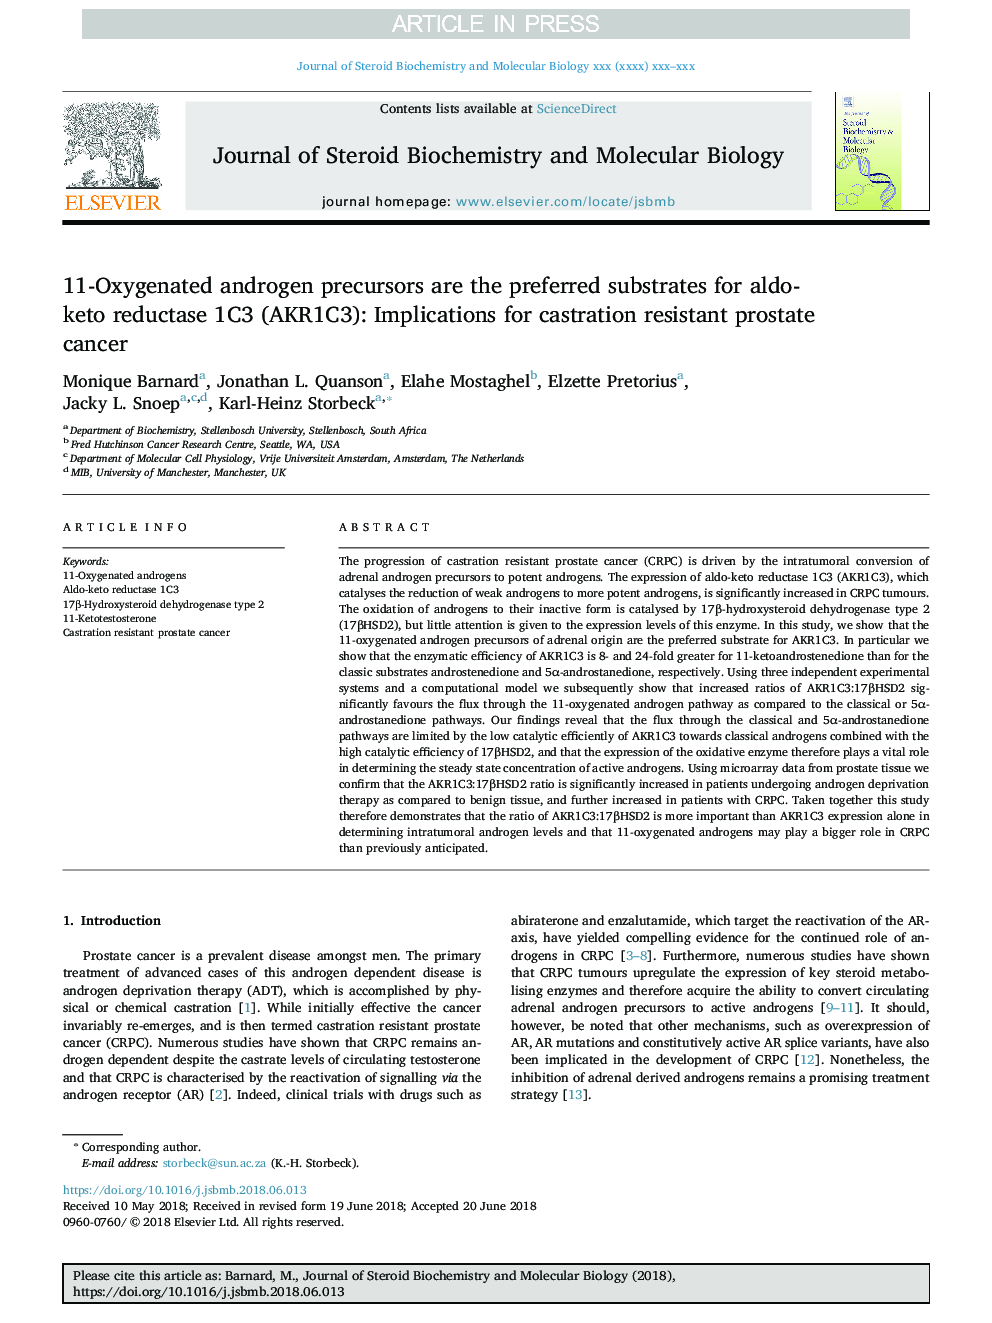 11-Oxygenated androgen precursors are the preferred substrates for aldo-keto reductase 1C3 (AKR1C3): Implications for castration resistant prostate cancer